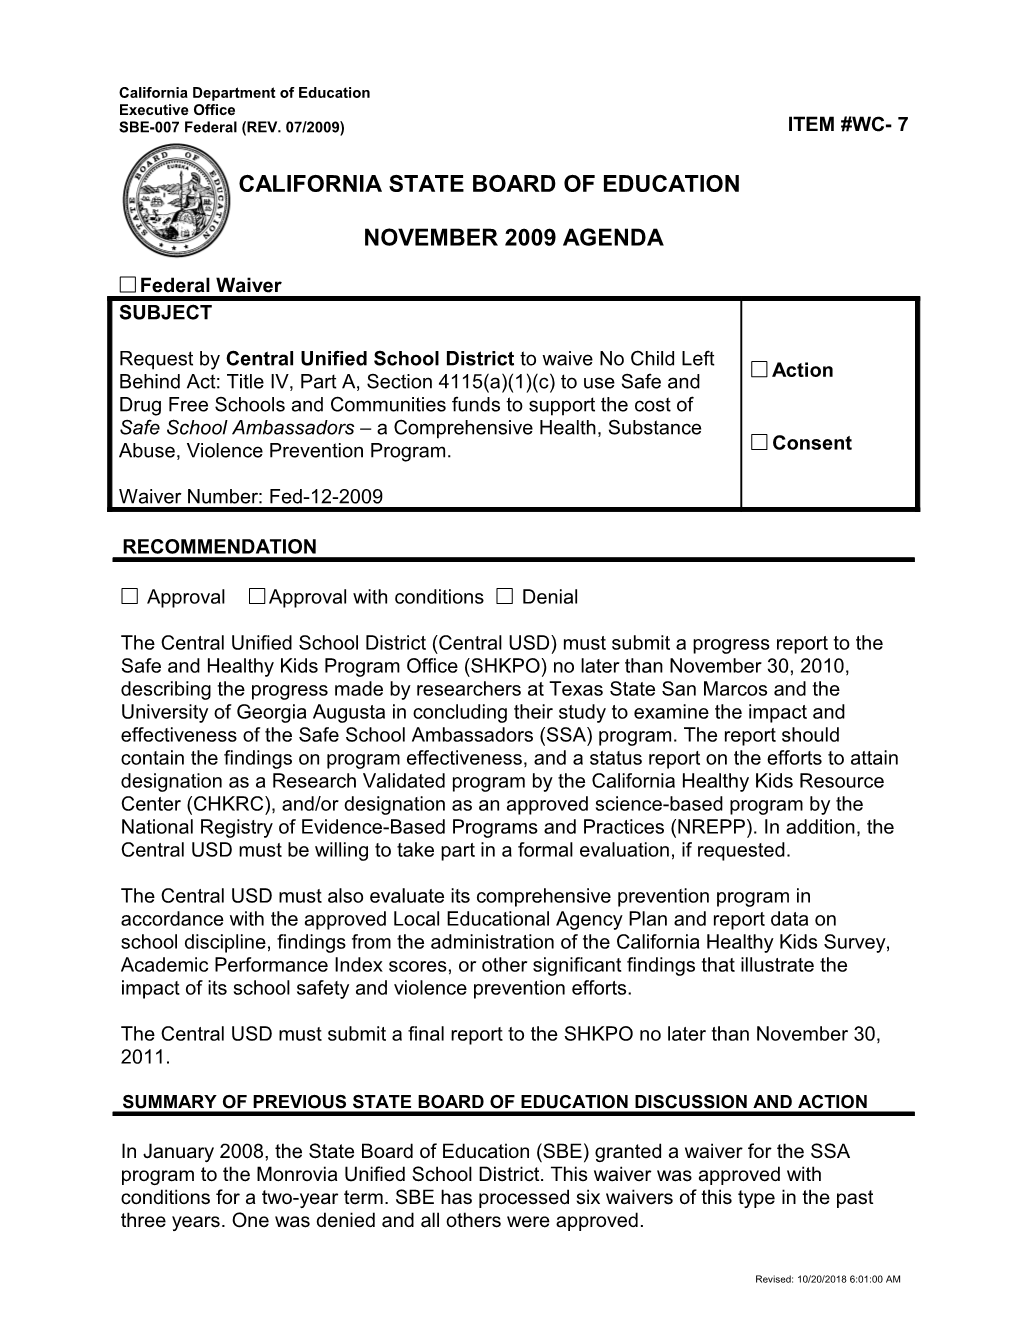 November 2009 Waiver Item WC7 - Meeting Agendas (CA State Board of Education)